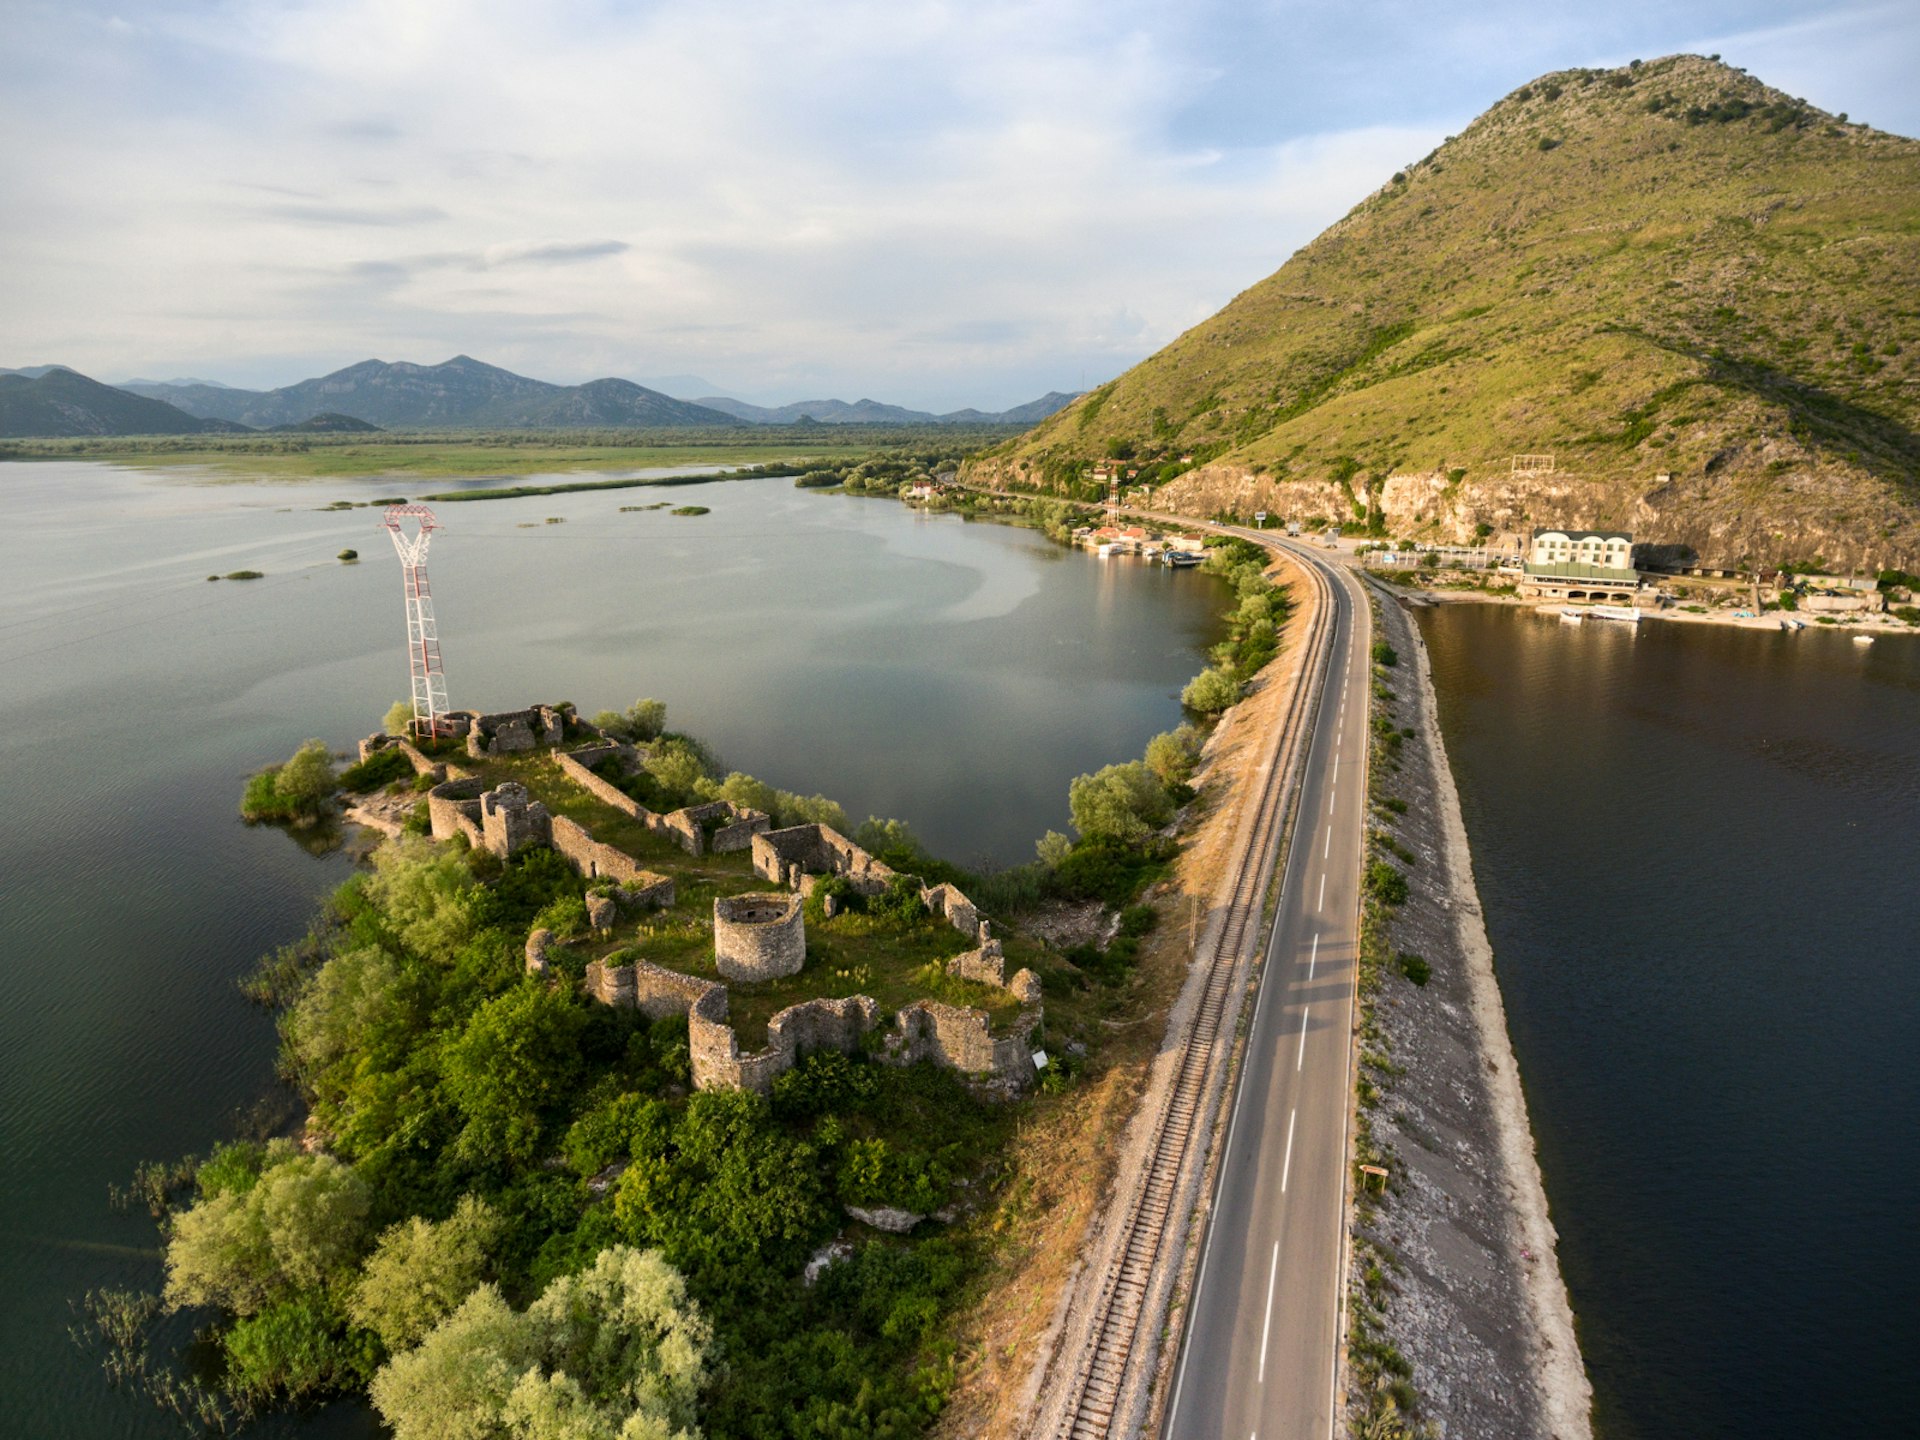 The train skirts the Lesendro Fortress ruins on Lake Skadar on its way to the Adriatic 